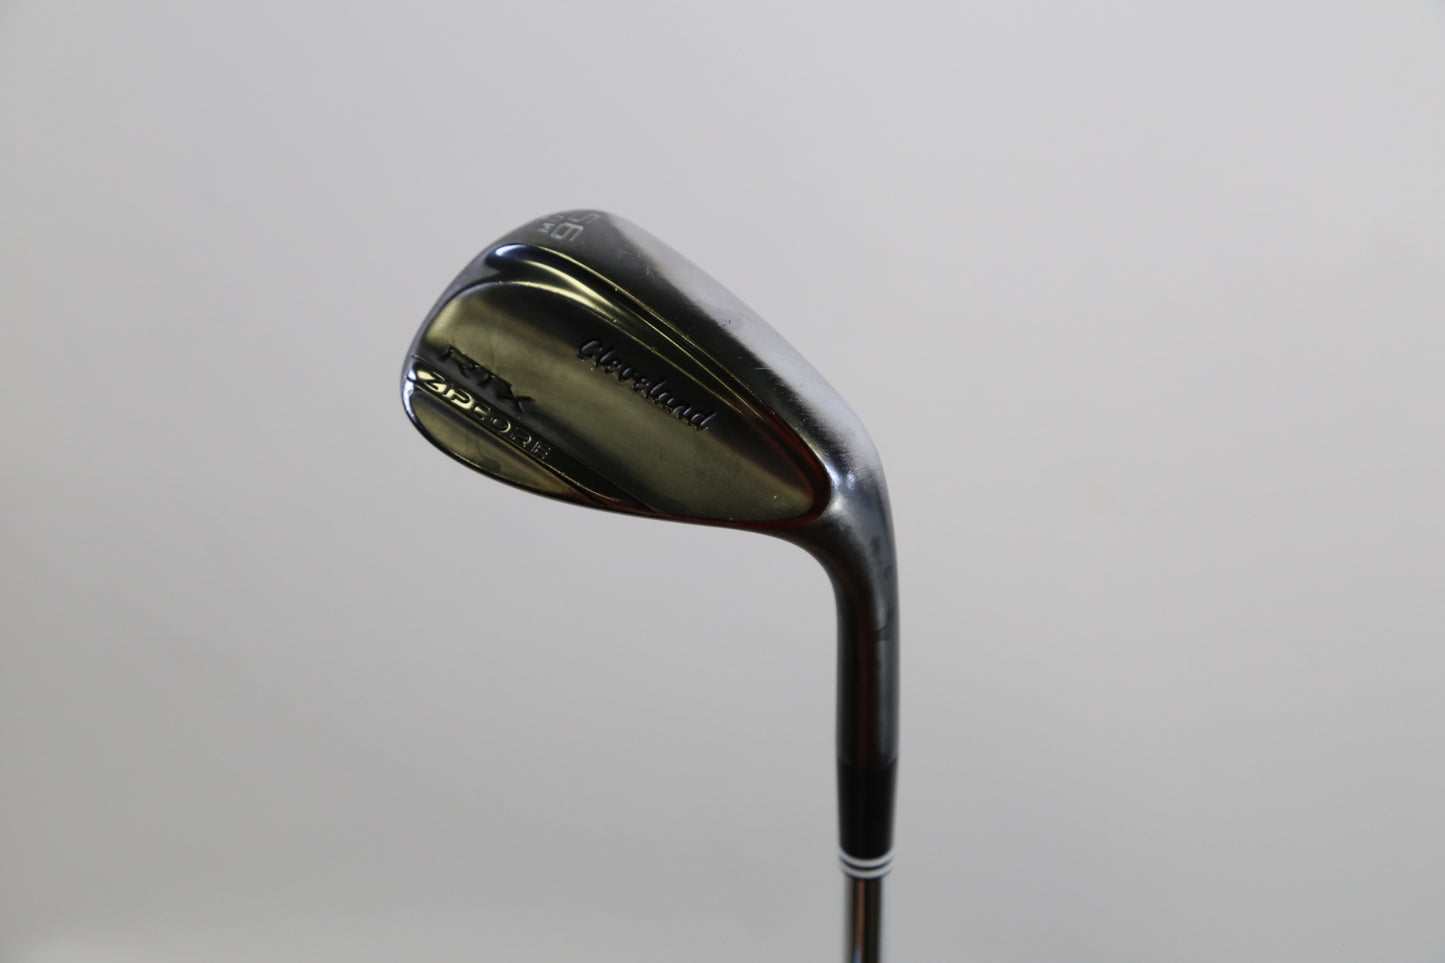 Used Cleveland RTX ZipCore Black Satin Low Sand Wedge - Right-Handed - 56 Degrees - Stiff Flex